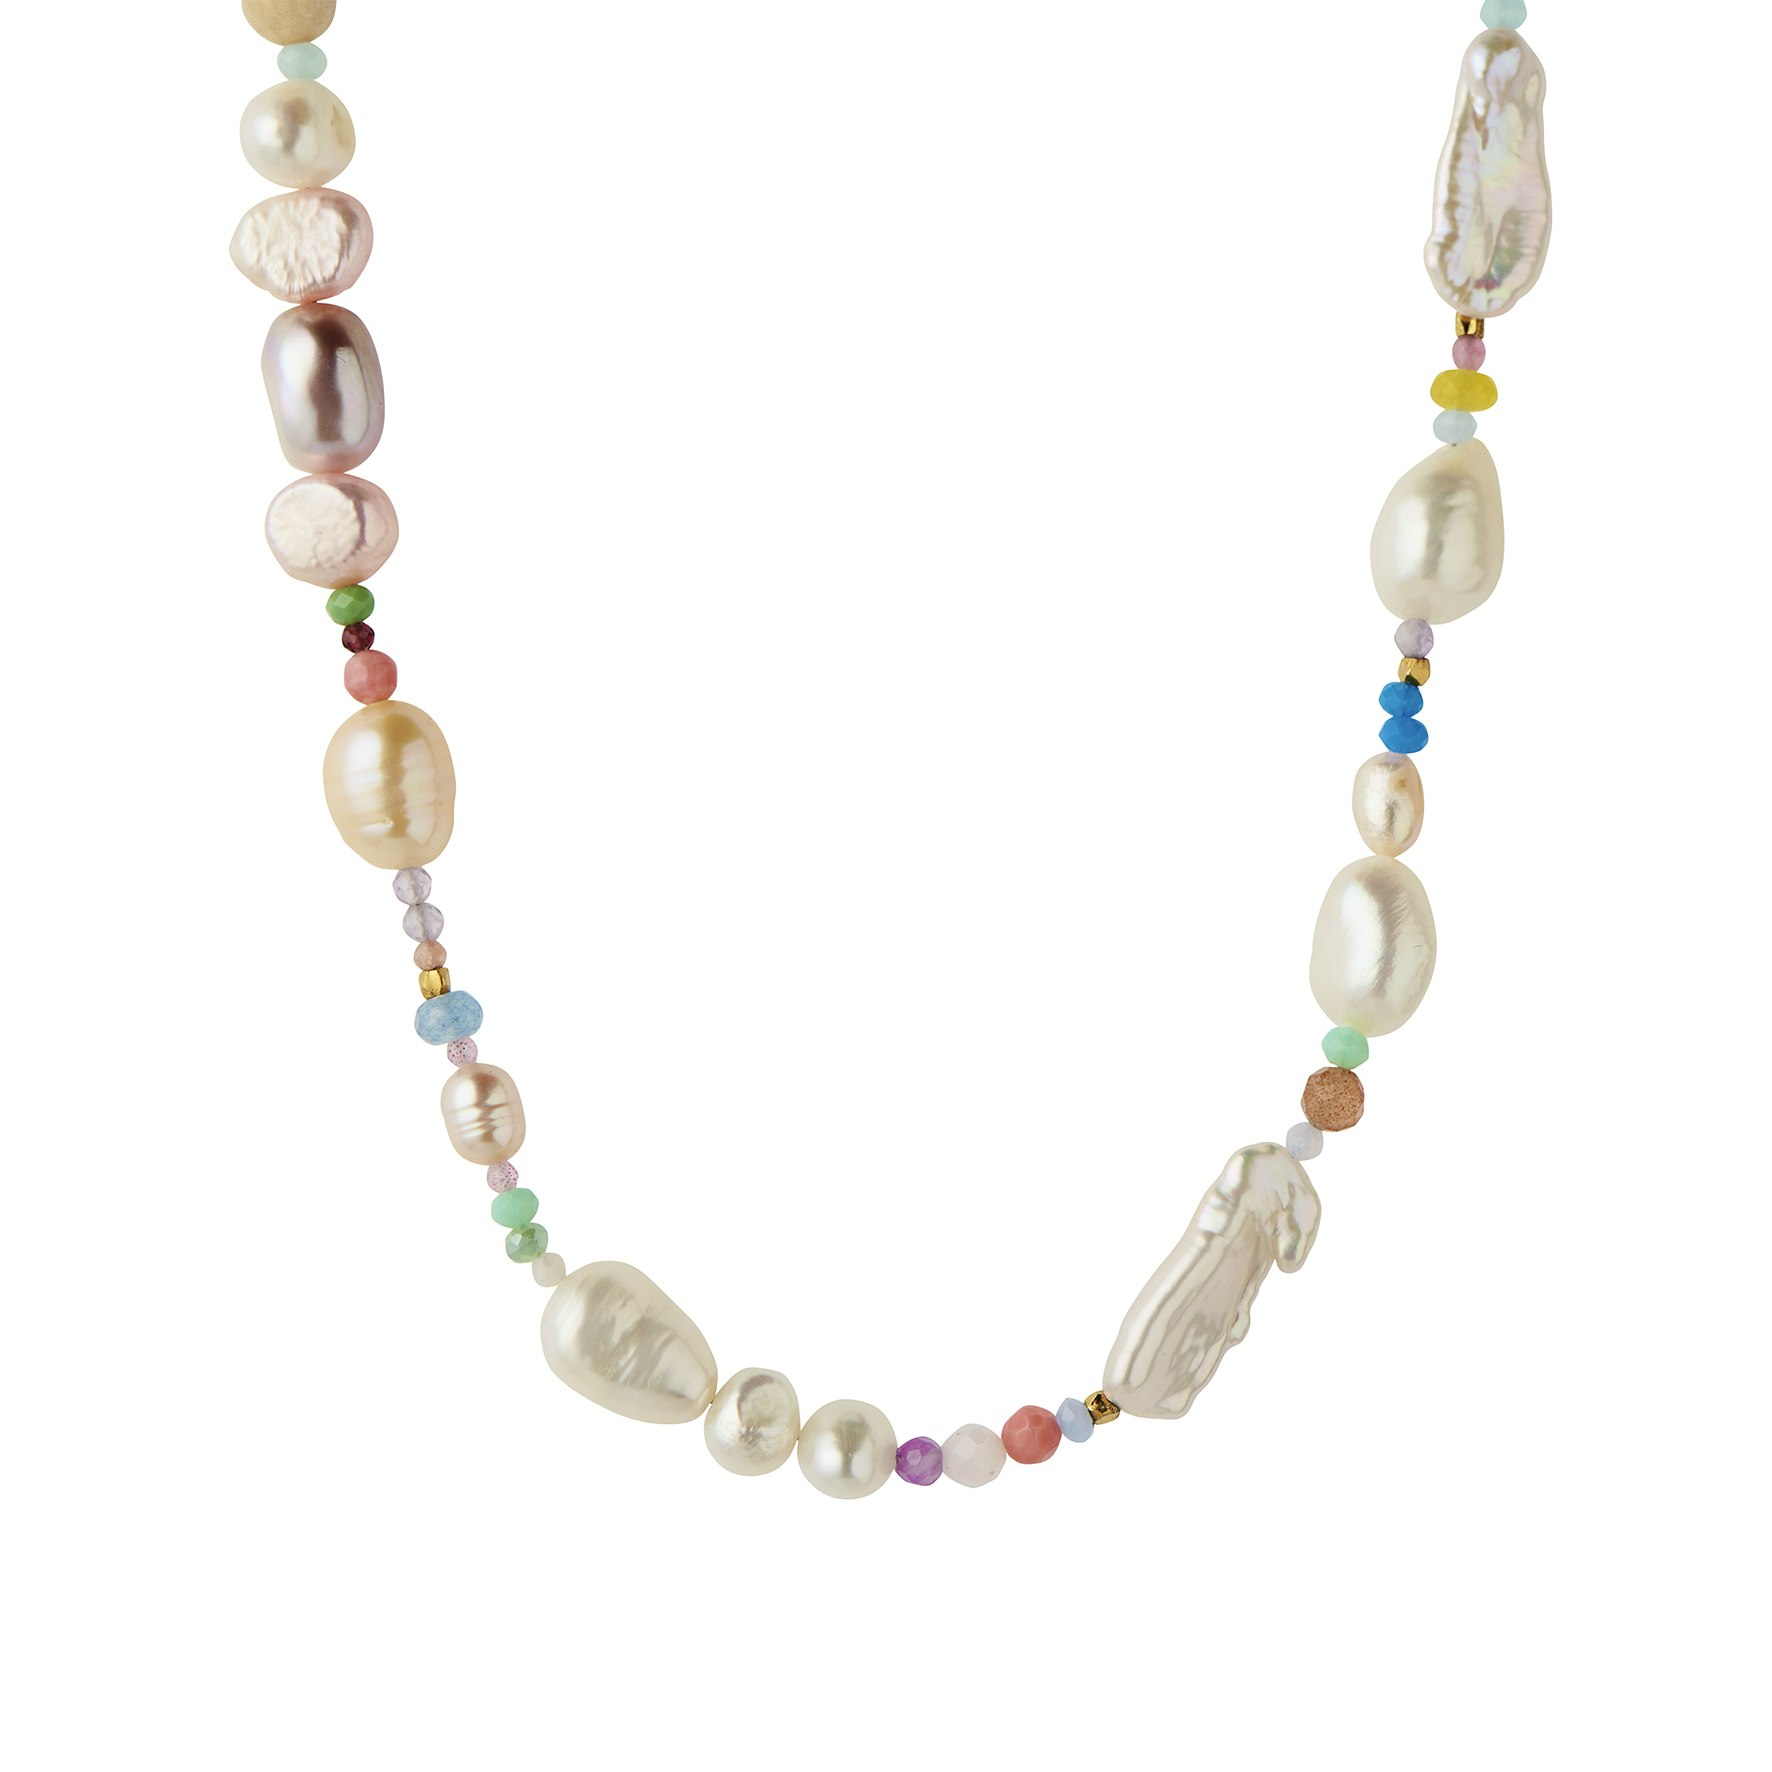 Cherry Garden Necklace - Pale Pastel Mix from STINE A Jewelry in Goldplated Silver Sterling 925